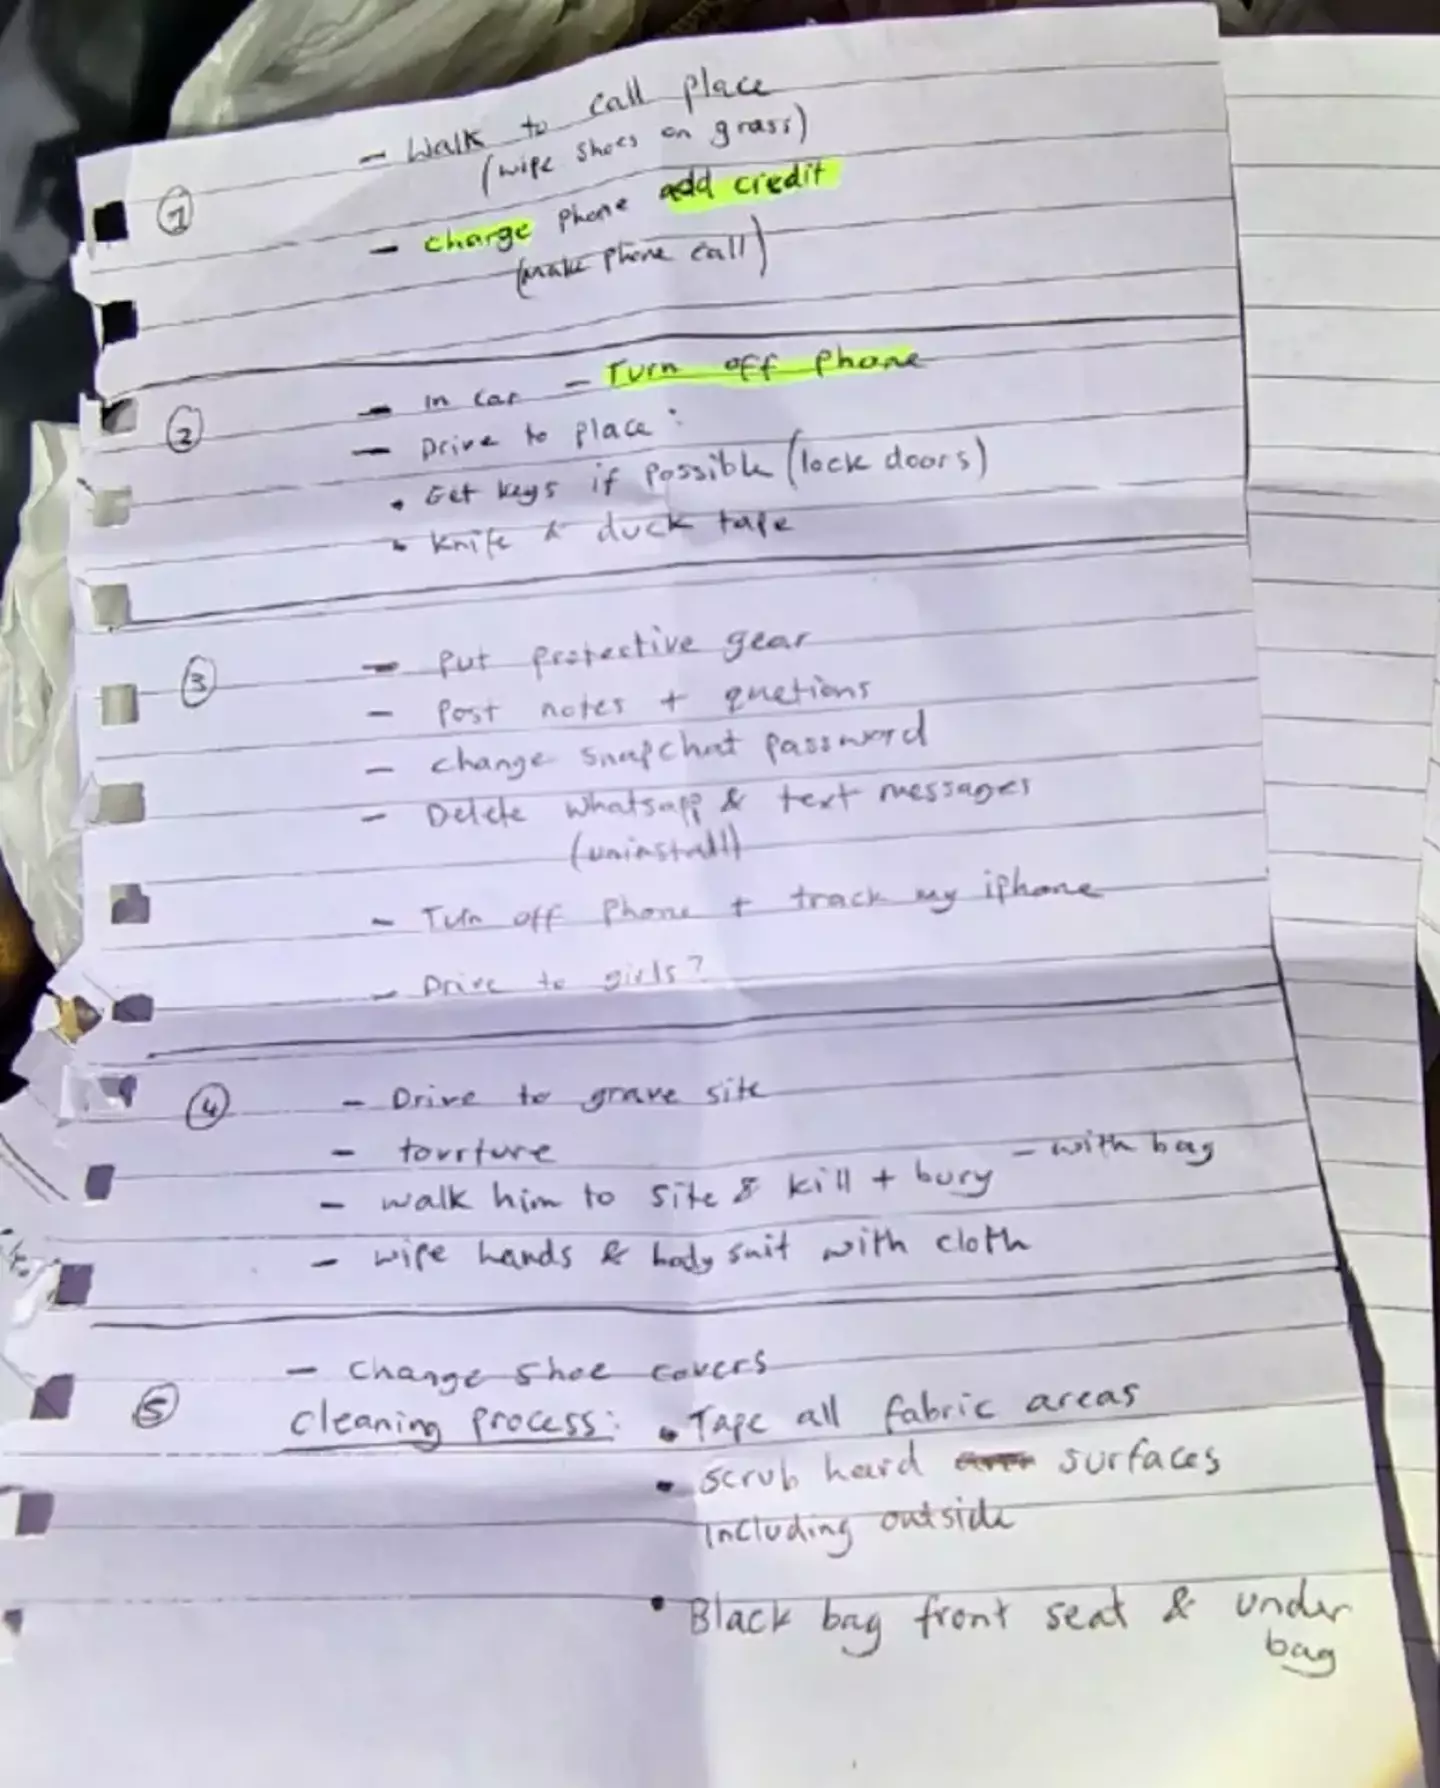 George wrote a to-do list detailing her plans to murder Adam Yiosese.